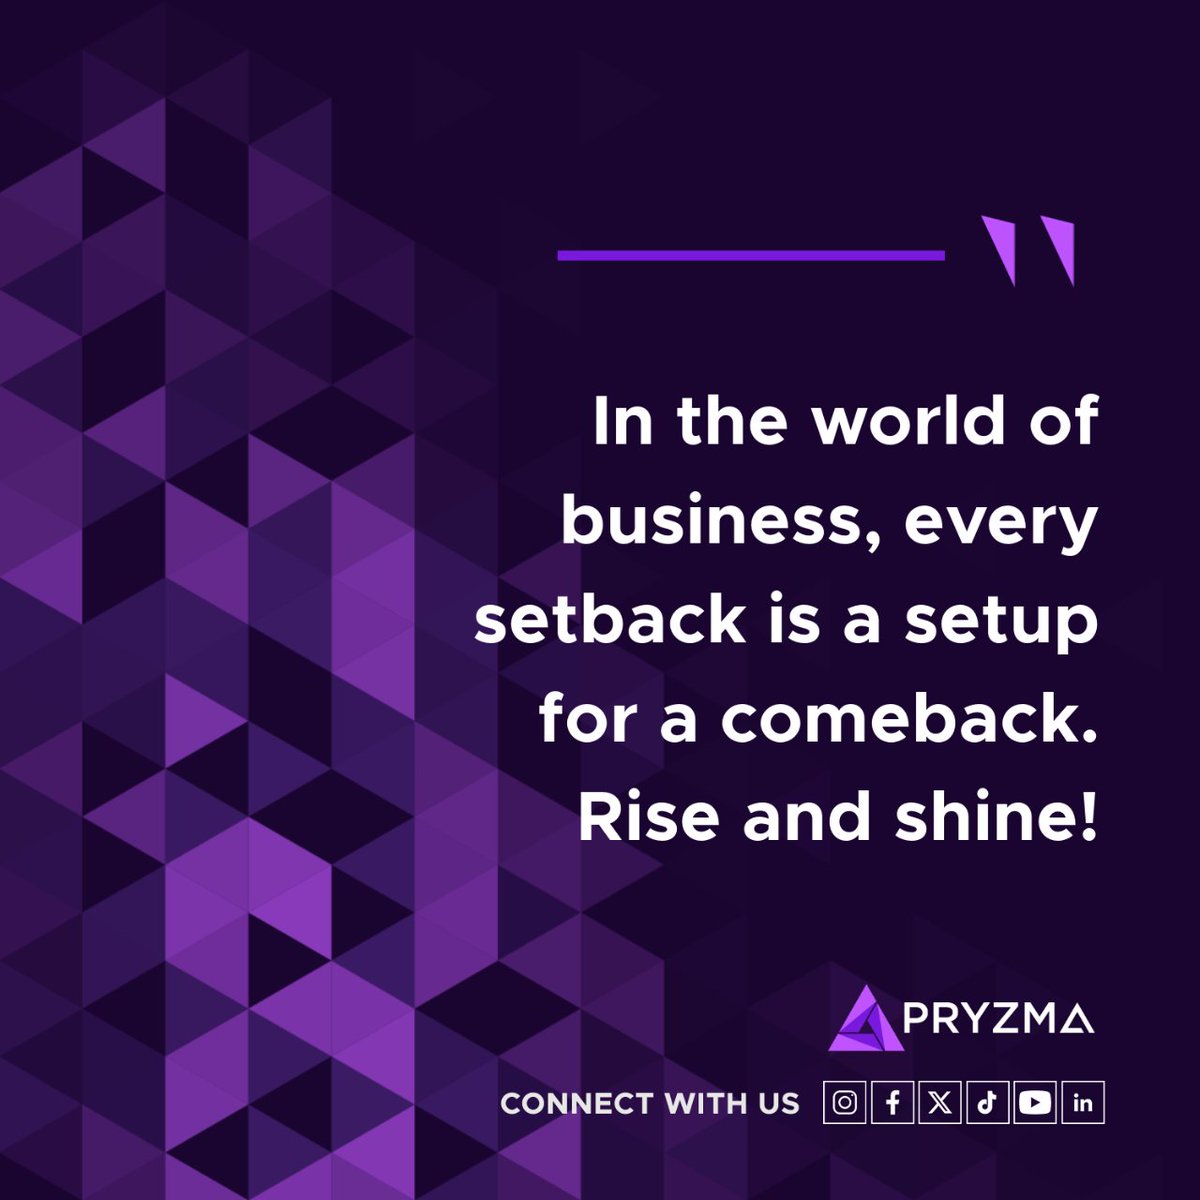 Don't let setbacks dim your shine. In business, every setback is a stepping stone to success. Contact Pryzma to help you with your comeback.

#ecommerce #ecommercebusiness #businessmotivation #amazonfba #amazonseller #ebayseller #walmartseller #pryzma